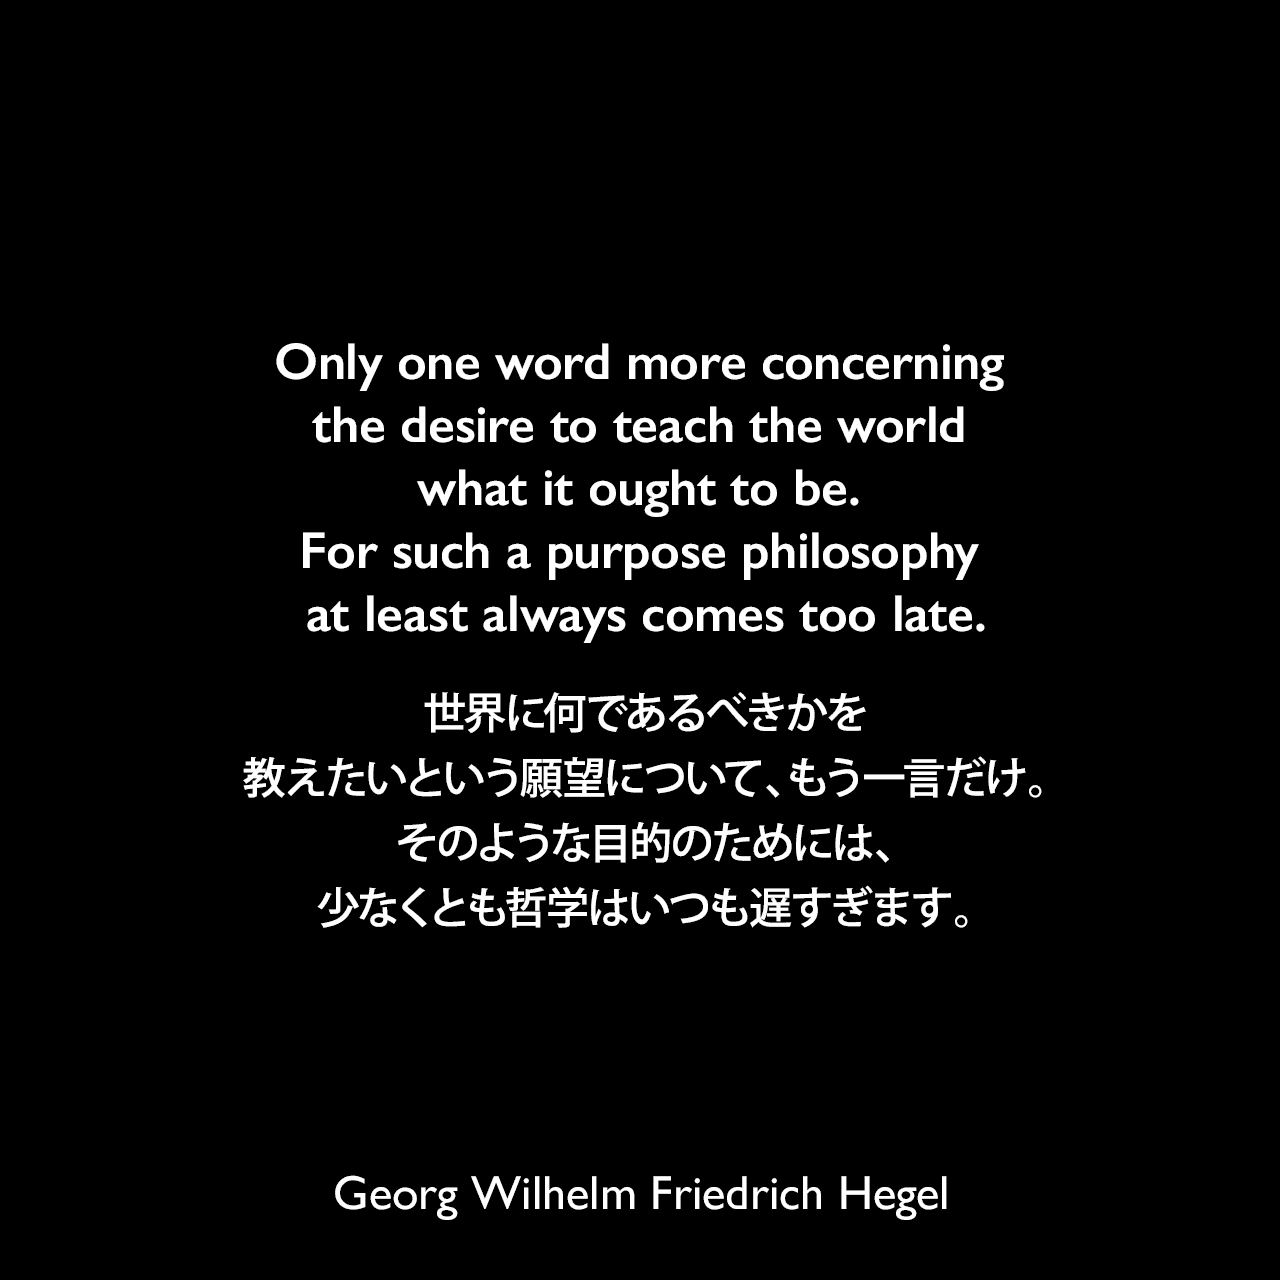 Only one word more concerning the desire to teach the world what it ought to be. For such a purpose philosophy at least always comes too late.世界に何であるべきかを教えたいという願望について、もう一言だけ。そのような目的のためには、少なくとも哲学はいつも遅すぎます。- ヘーゲルによる本「法の哲学」よりGeorg Wilhelm Friedrich Hegel